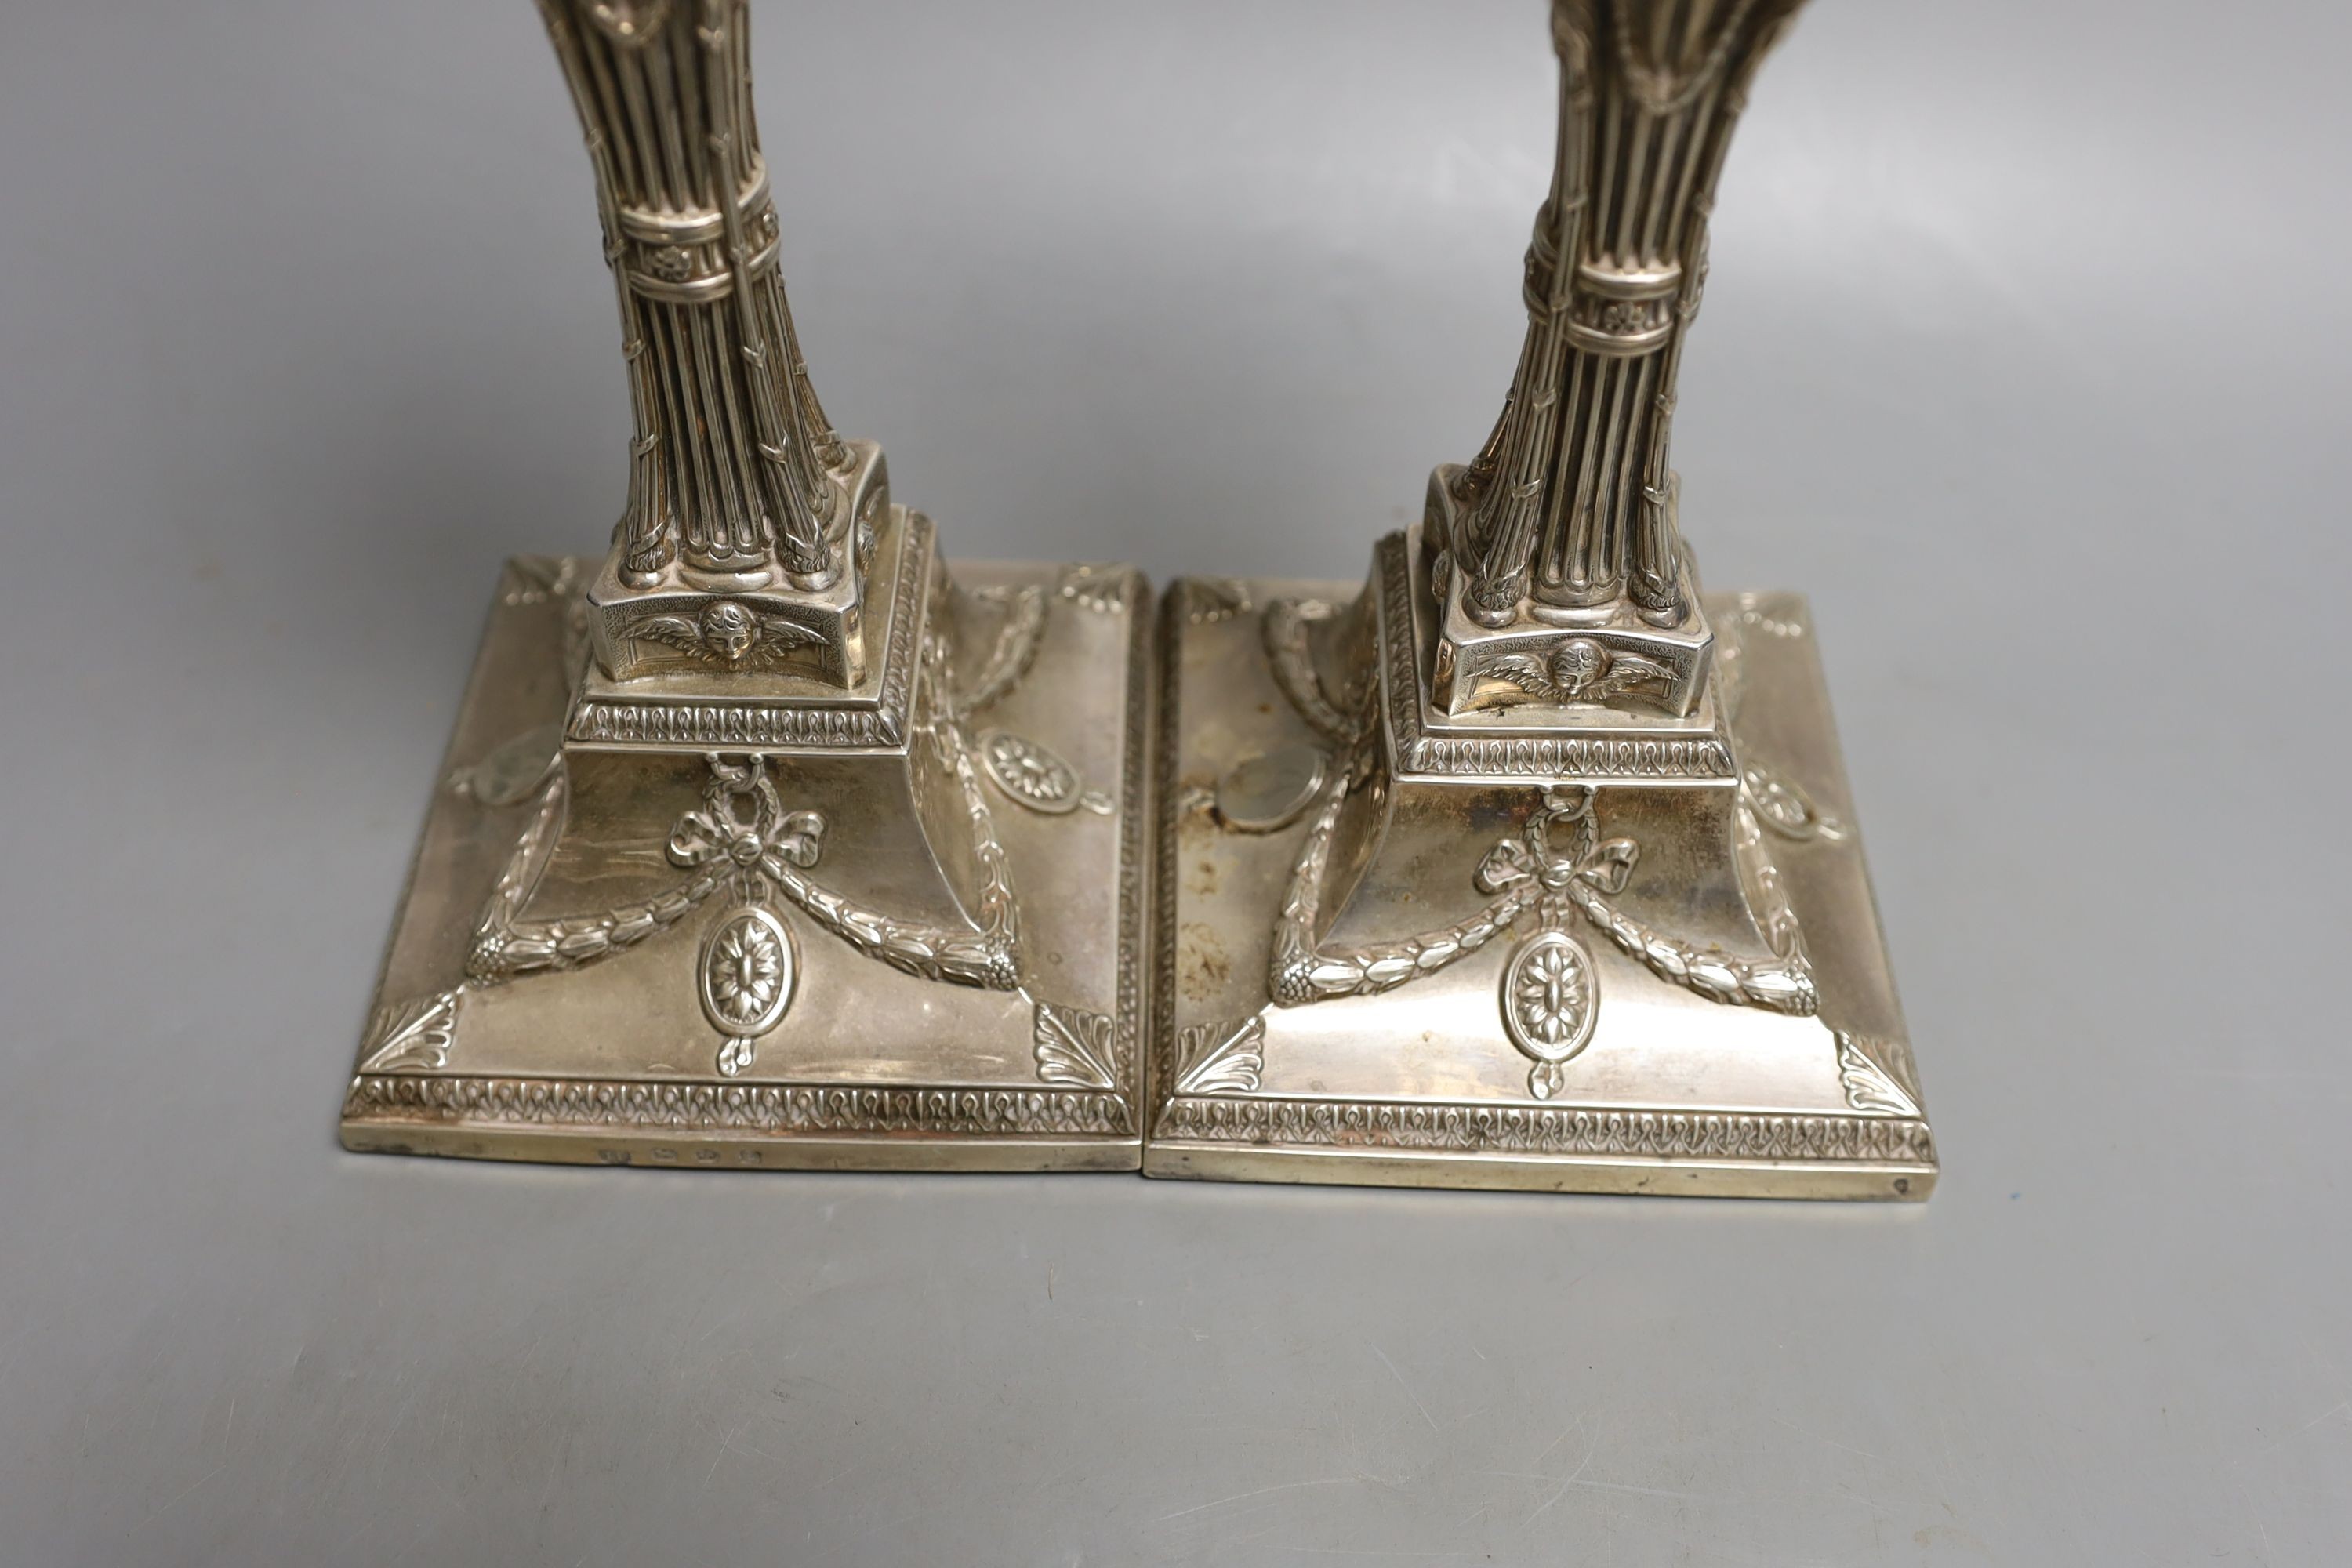 A matched pair of George III silver candlesticks, with waisted fluted stems and rams head, winged mask and swag decoration, Joseph Tibbitts, Sheffield, 1775 and George Ashforth & Co, Sheffield, 1775 29.4cm, weighted.